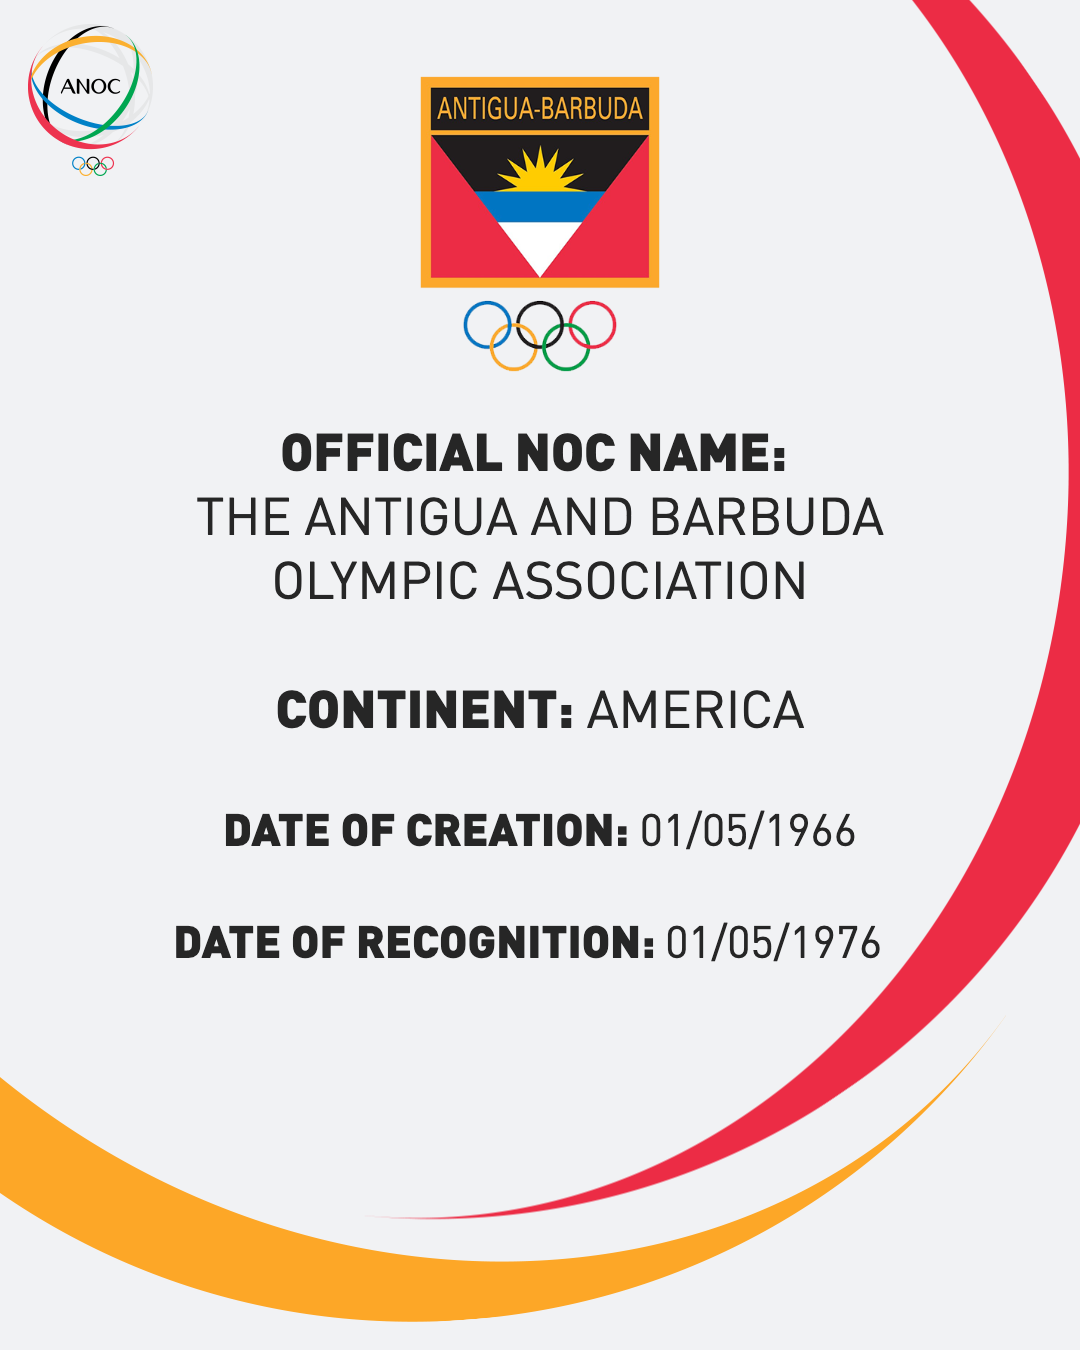 The Antigua and Barbuda Olympic Association